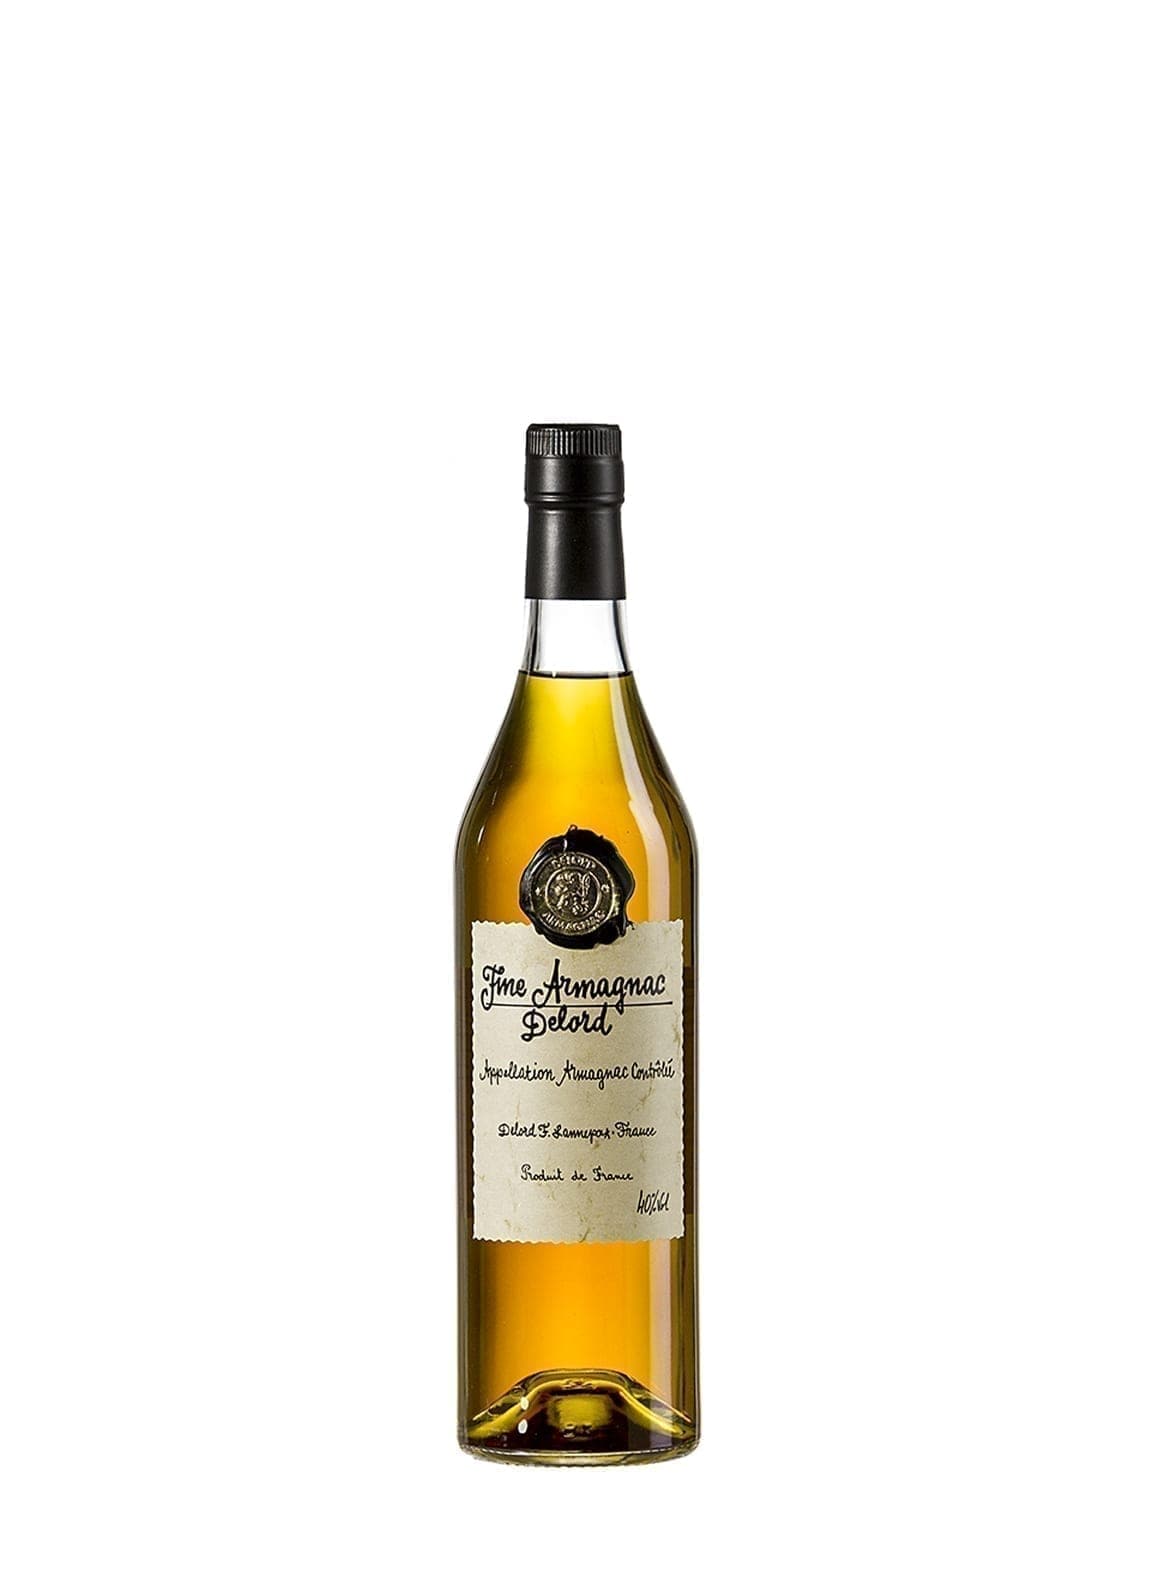 Delord Bas Armagnac Fine 2-3 years 40% 200ml | Brandy | Shop online at Spirits of France